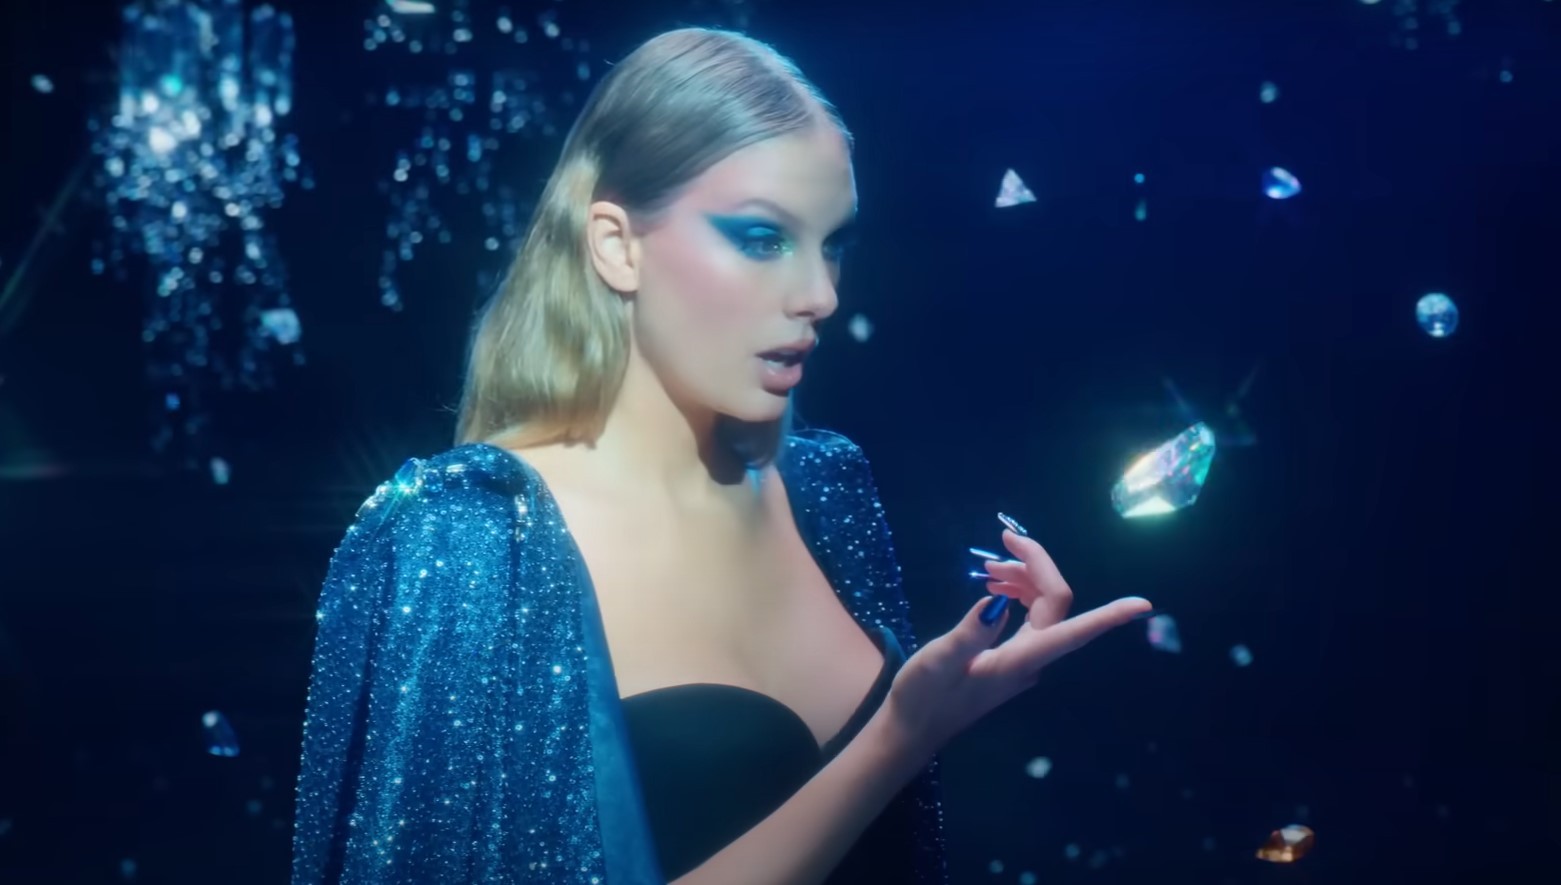 Taylor Swifts Bejeweled Music Video Is Filled With Easter Eggs The A List Hype